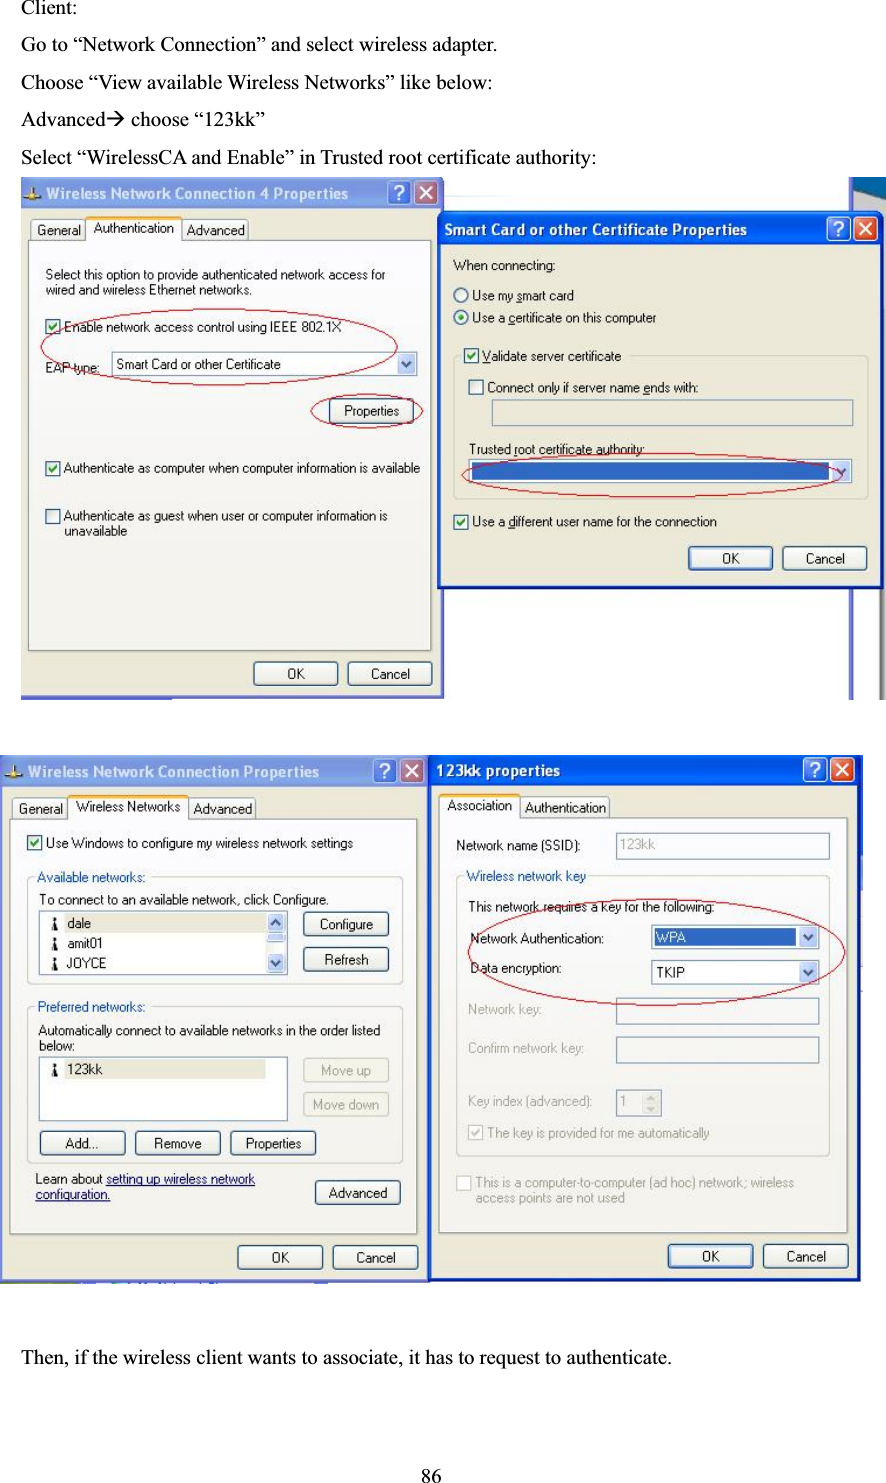 86Client: Go to “Network Connection” and select wireless adapter. Choose “View available Wireless Networks” like below: AdvancedÆ choose “123kk” Select “WirelessCA and Enable” in Trusted root certificate authority:     Then, if the wireless client wants to associate, it has to request to authenticate.       